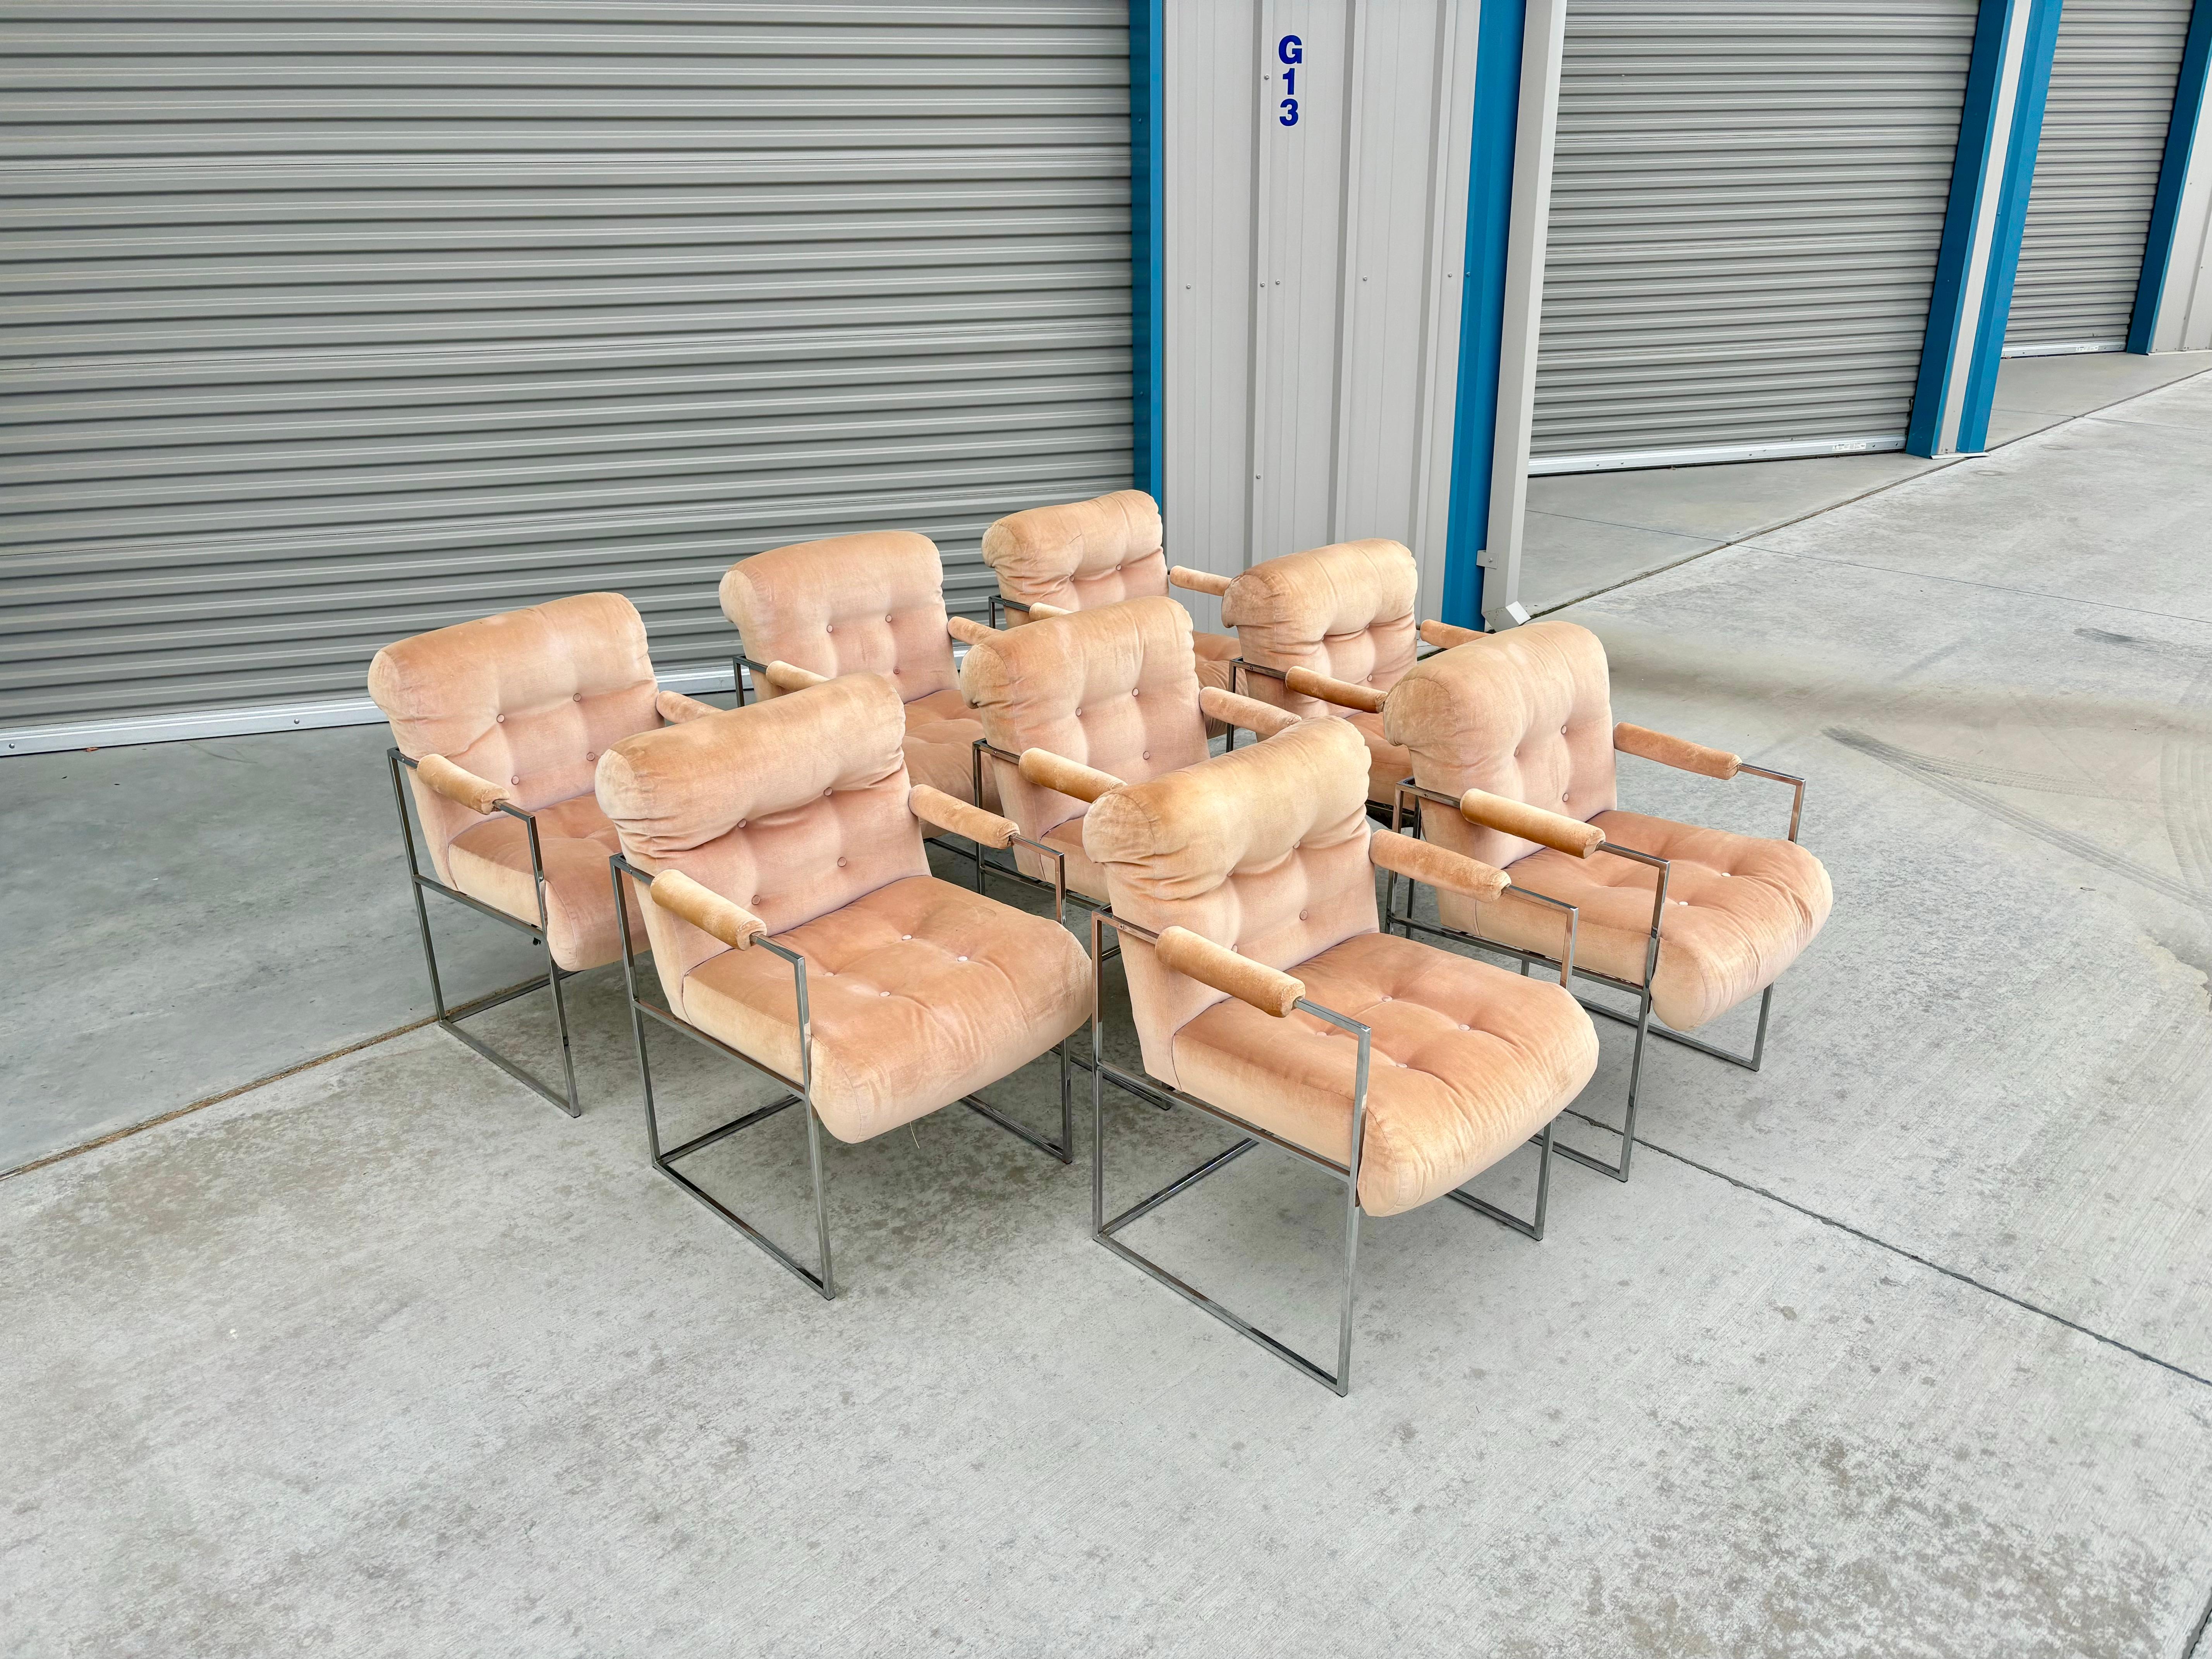 These stunning mid-century dining chairs were designed by Milo Baughman and manufactured by Thayer Coggin in the United States during the 1960s. This set includes eight chairs, each featuring a sleek chrome frame and comfortable armrests. The chairs